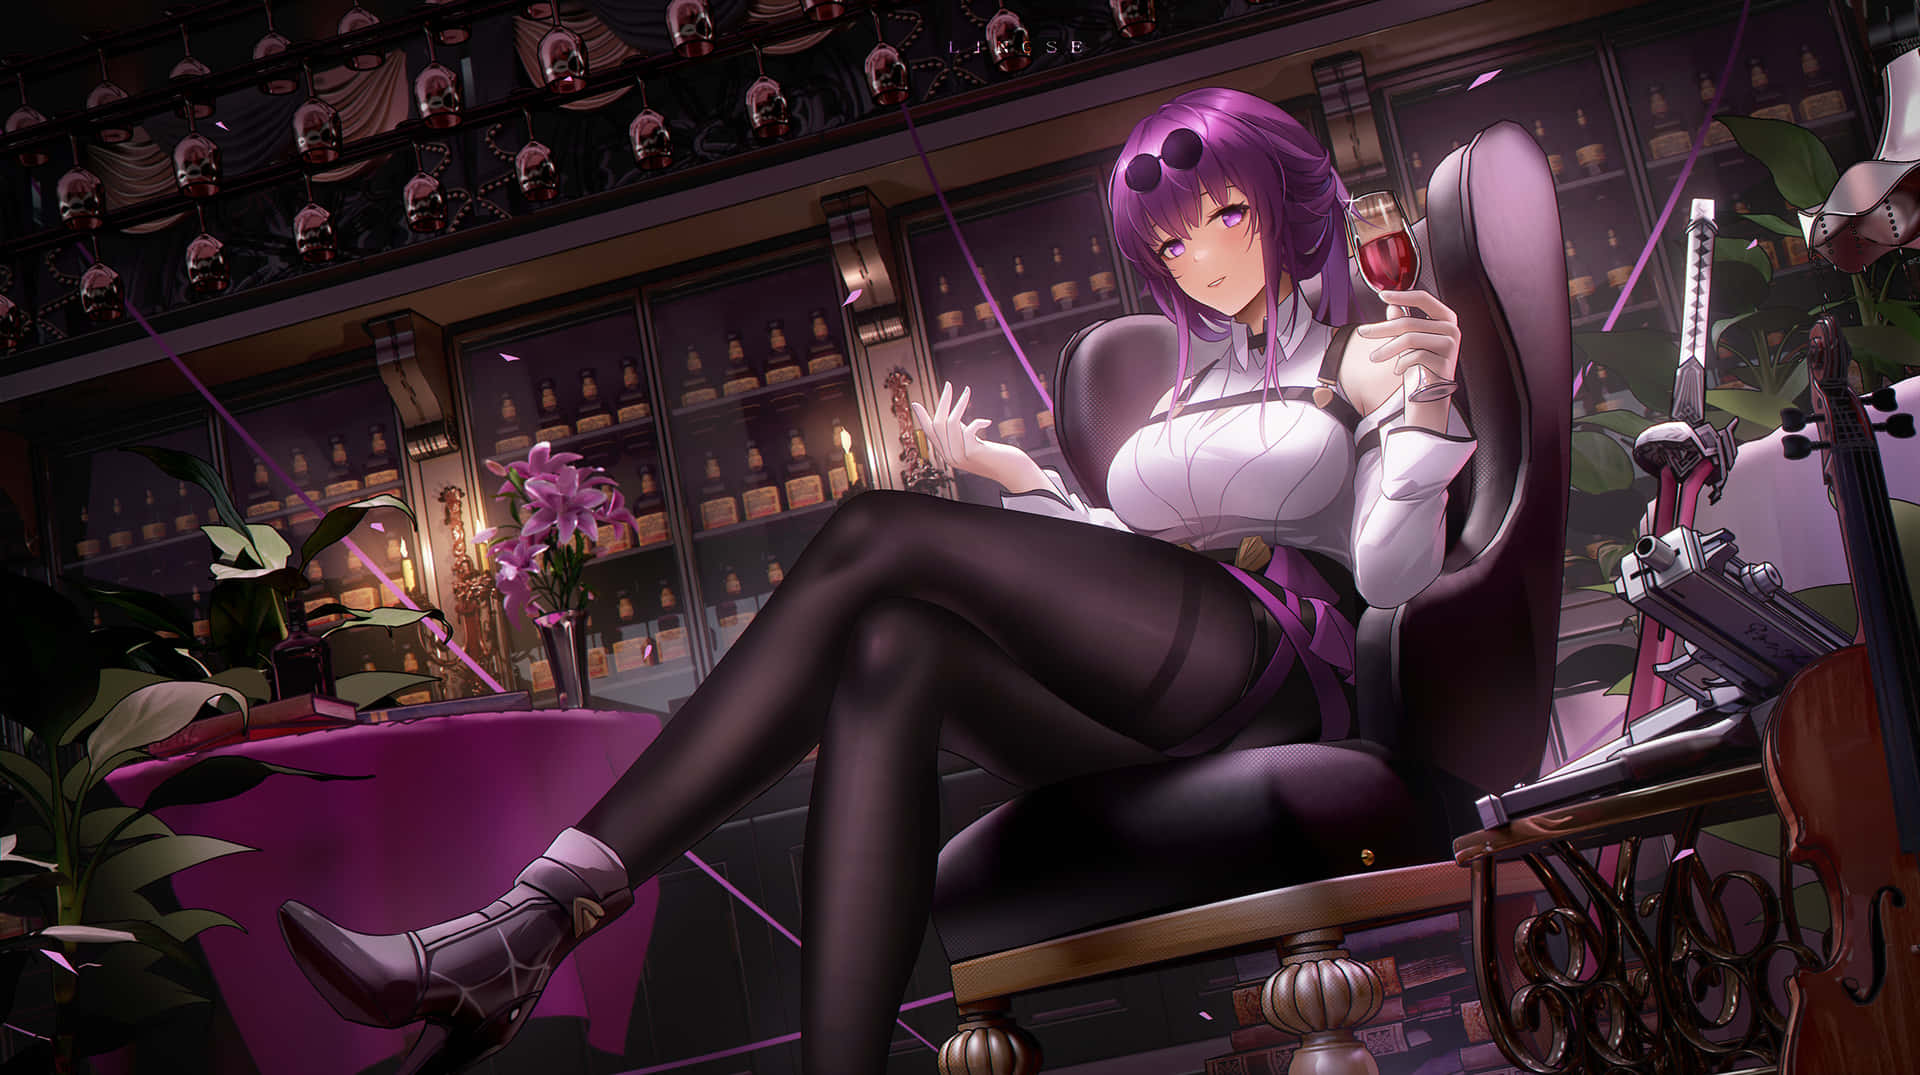 Mysterious Purple Haired Anime Characterwith Wine Wallpaper